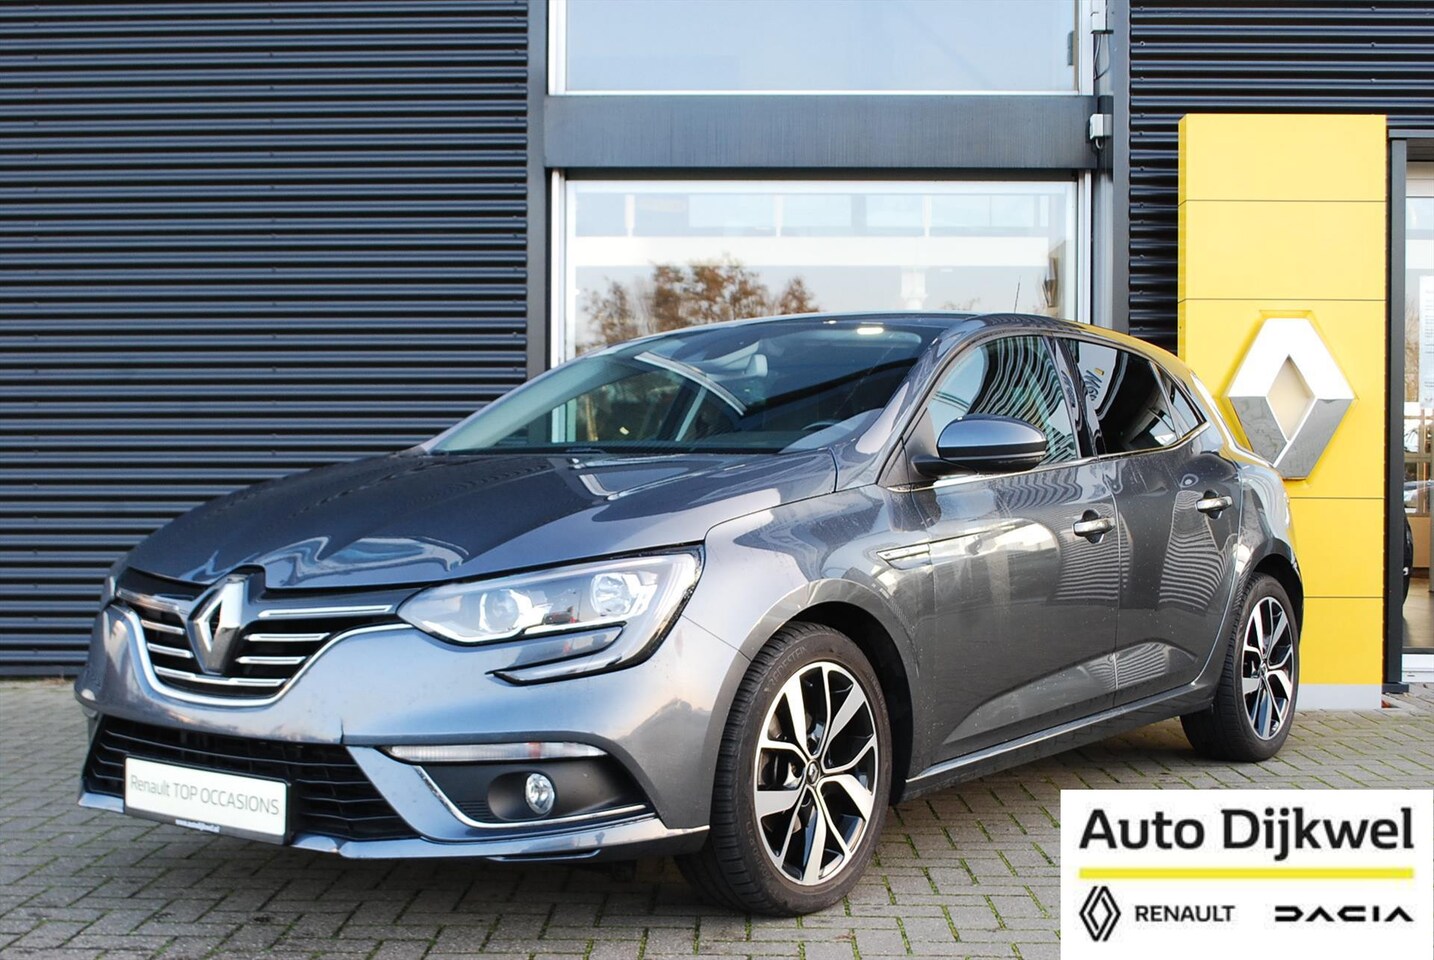 Isoleren dreigen ideologie renault megane automaat used – Search for your used car on the parking